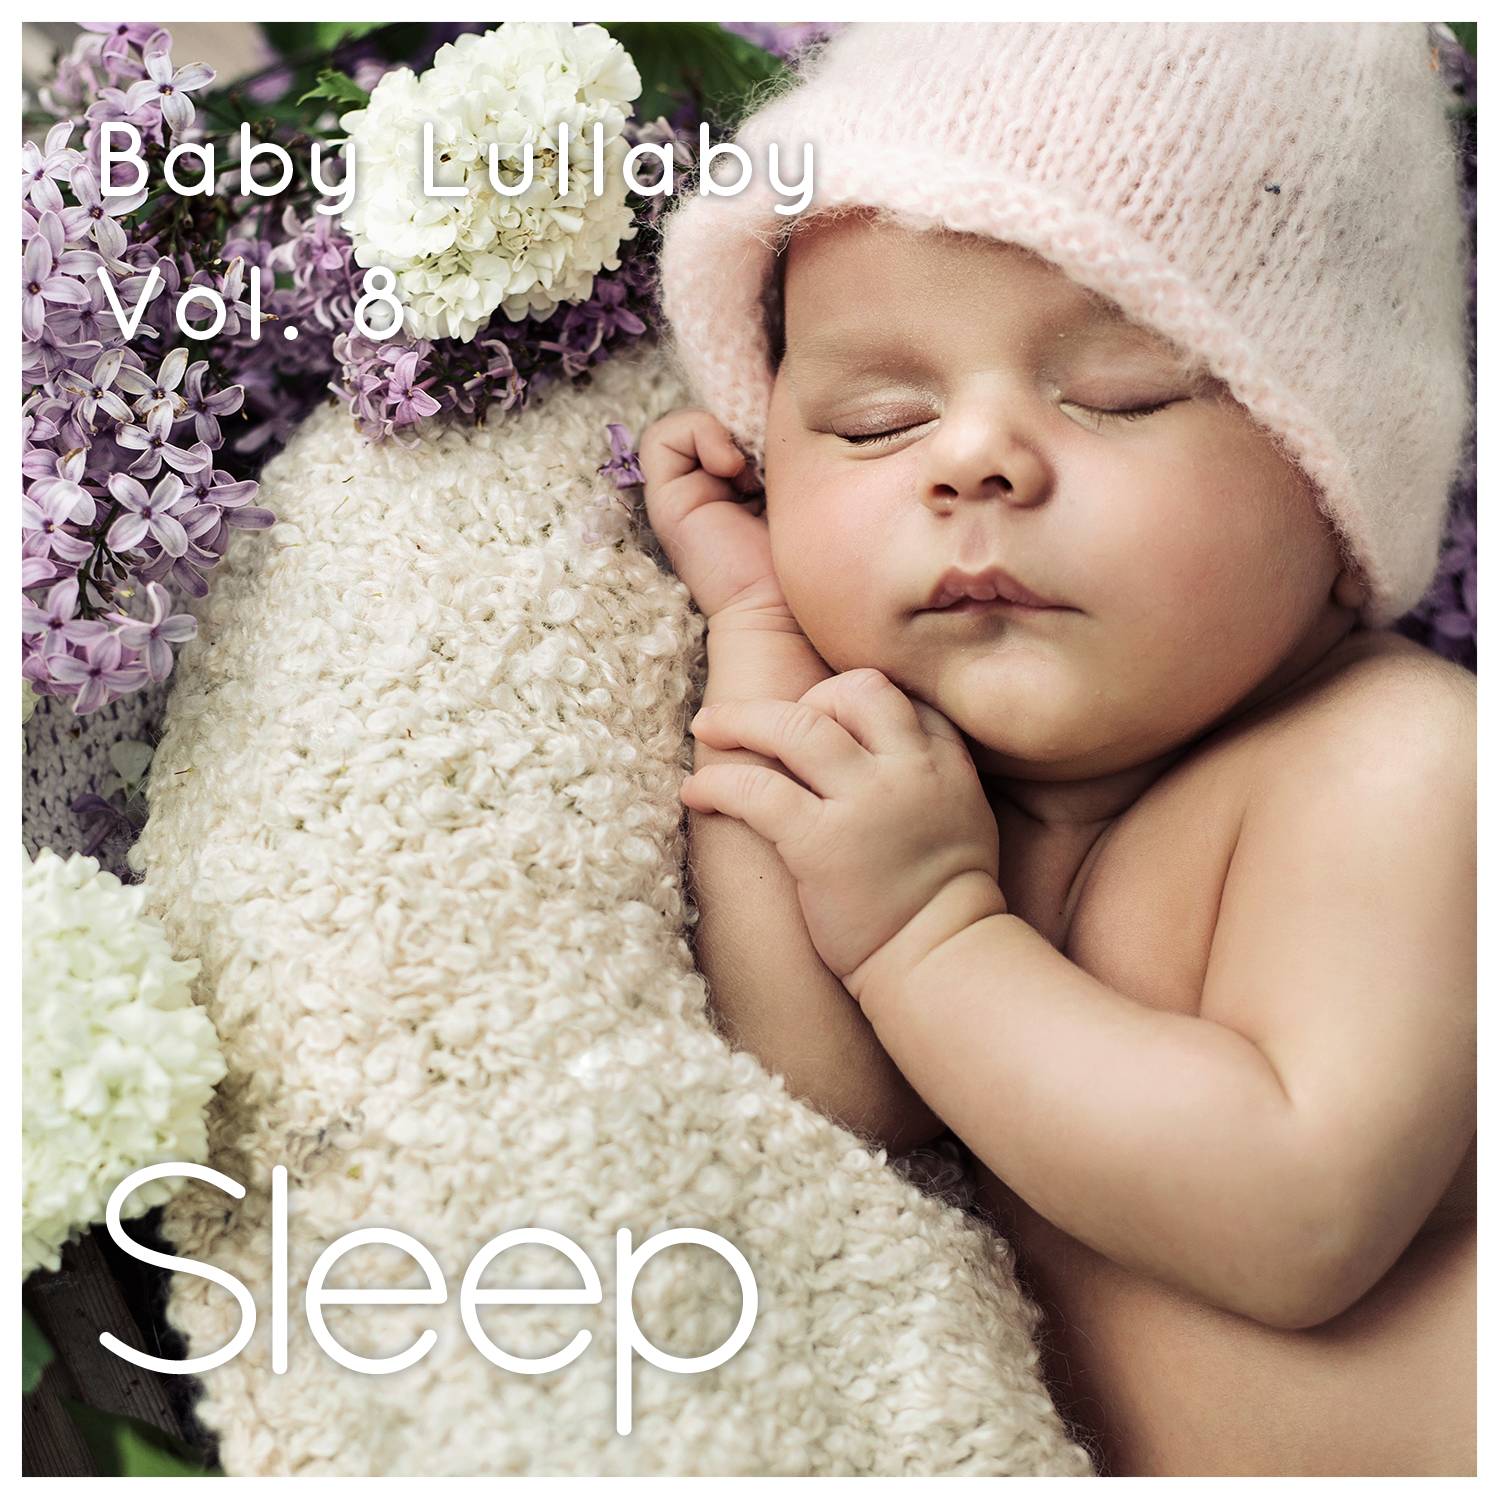 Baby Sleep Ambient Lullaby, Pt. 38